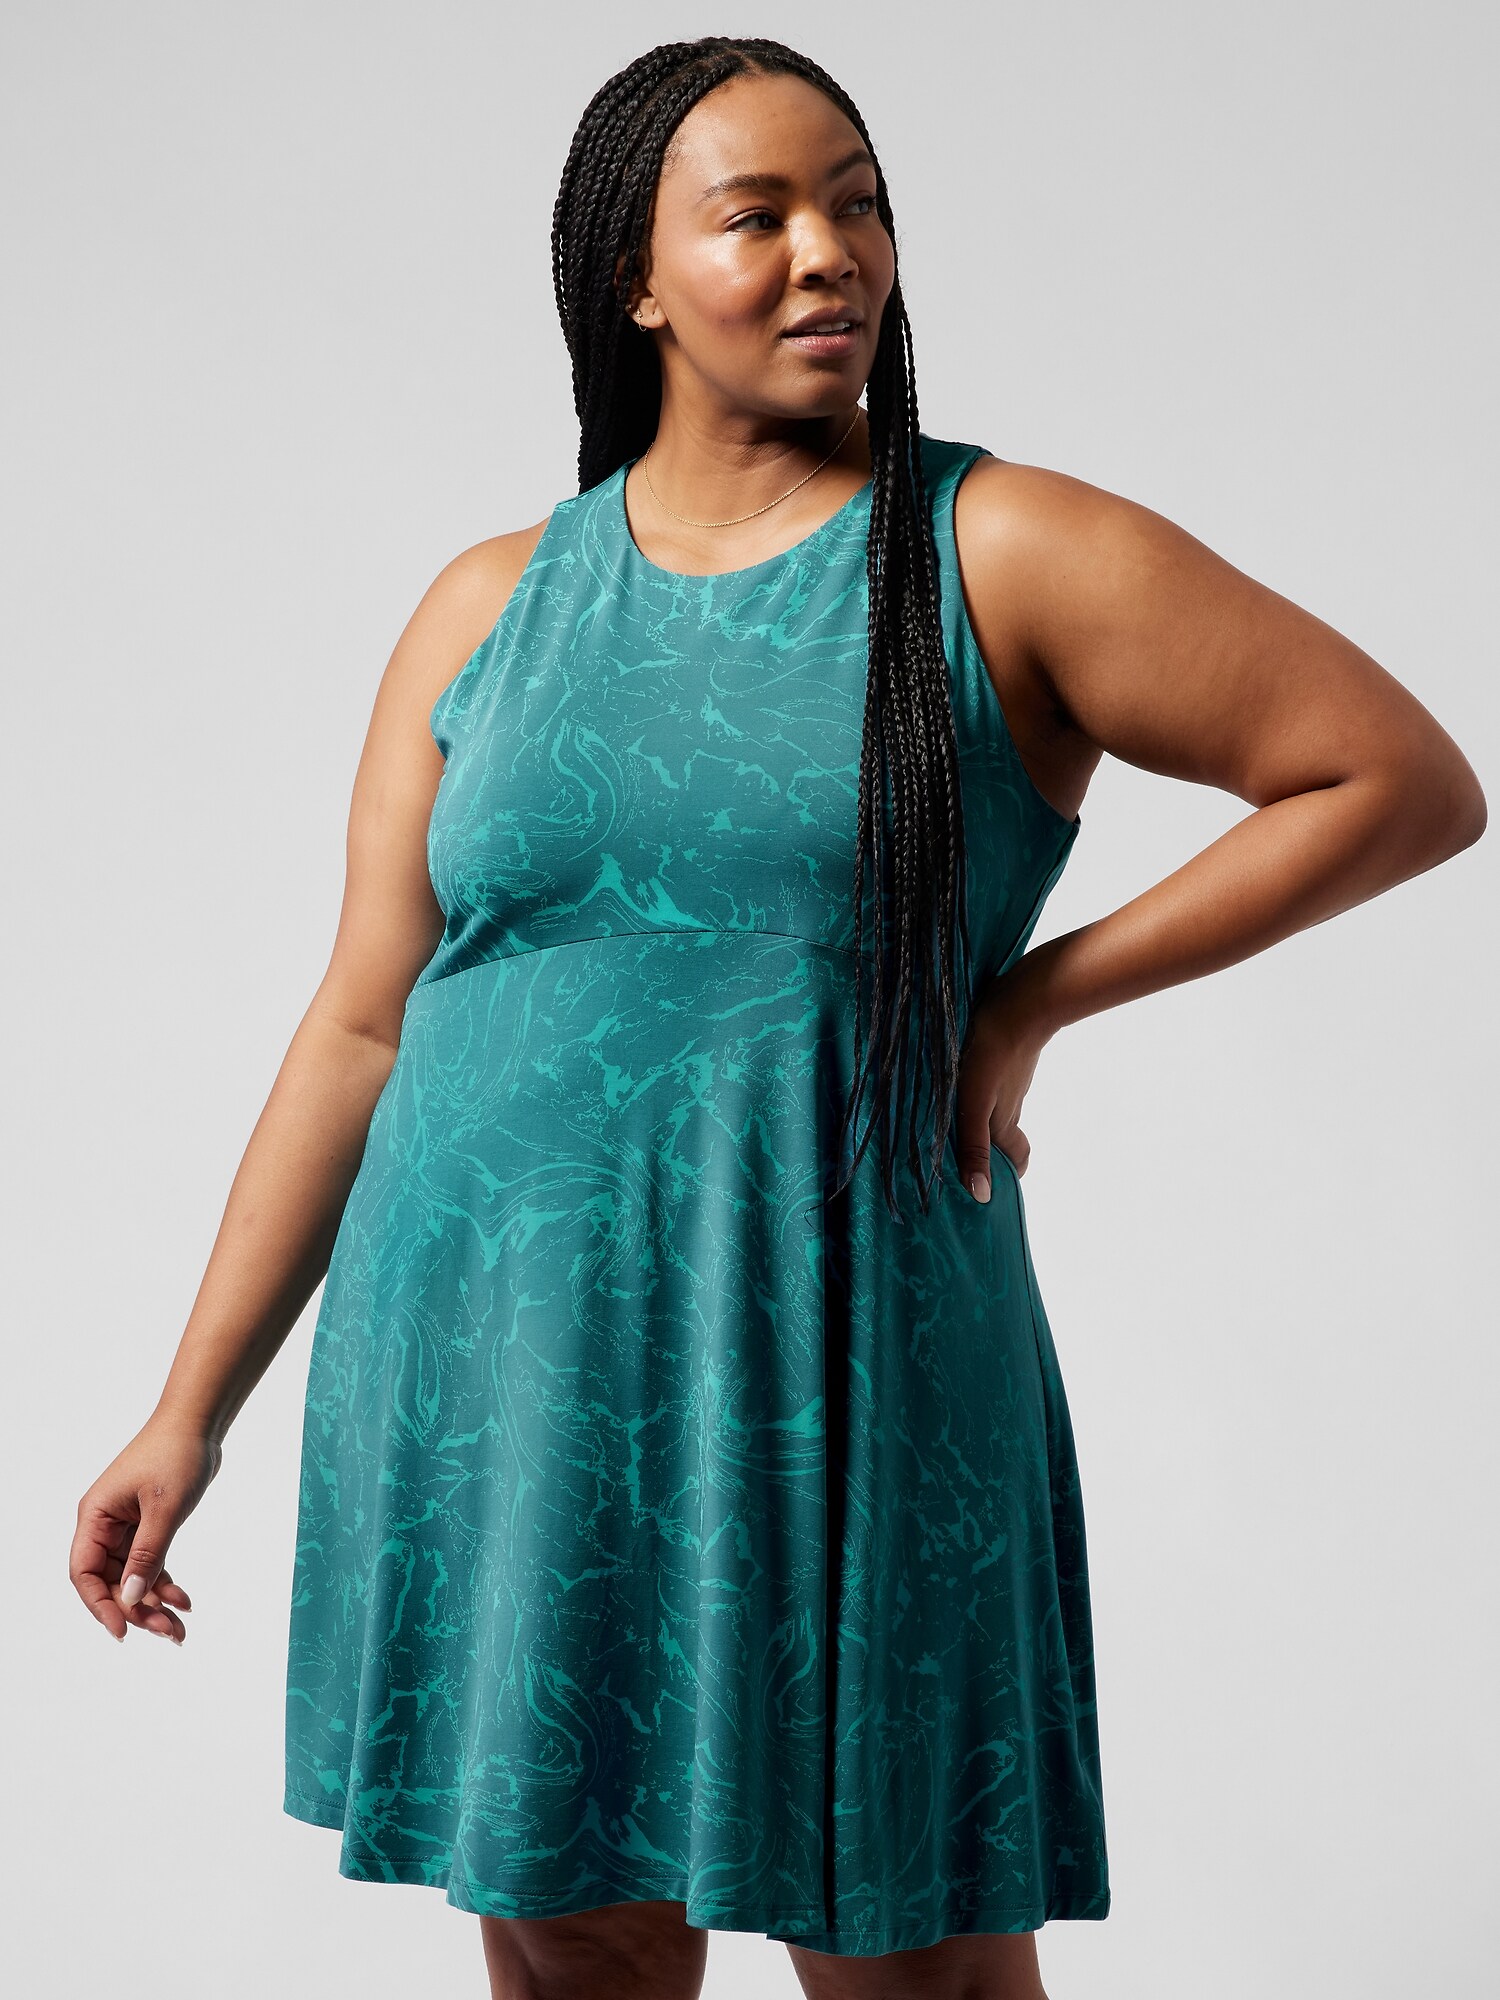 ATHLETA FIT REVIEW (Part 1): Santorini High Neck Printed Dress, Santorini  High Neck Mix Stripe Dress, Brookfield Dress, and Side Gather T-Shirt Dress  - The Sweat Edit